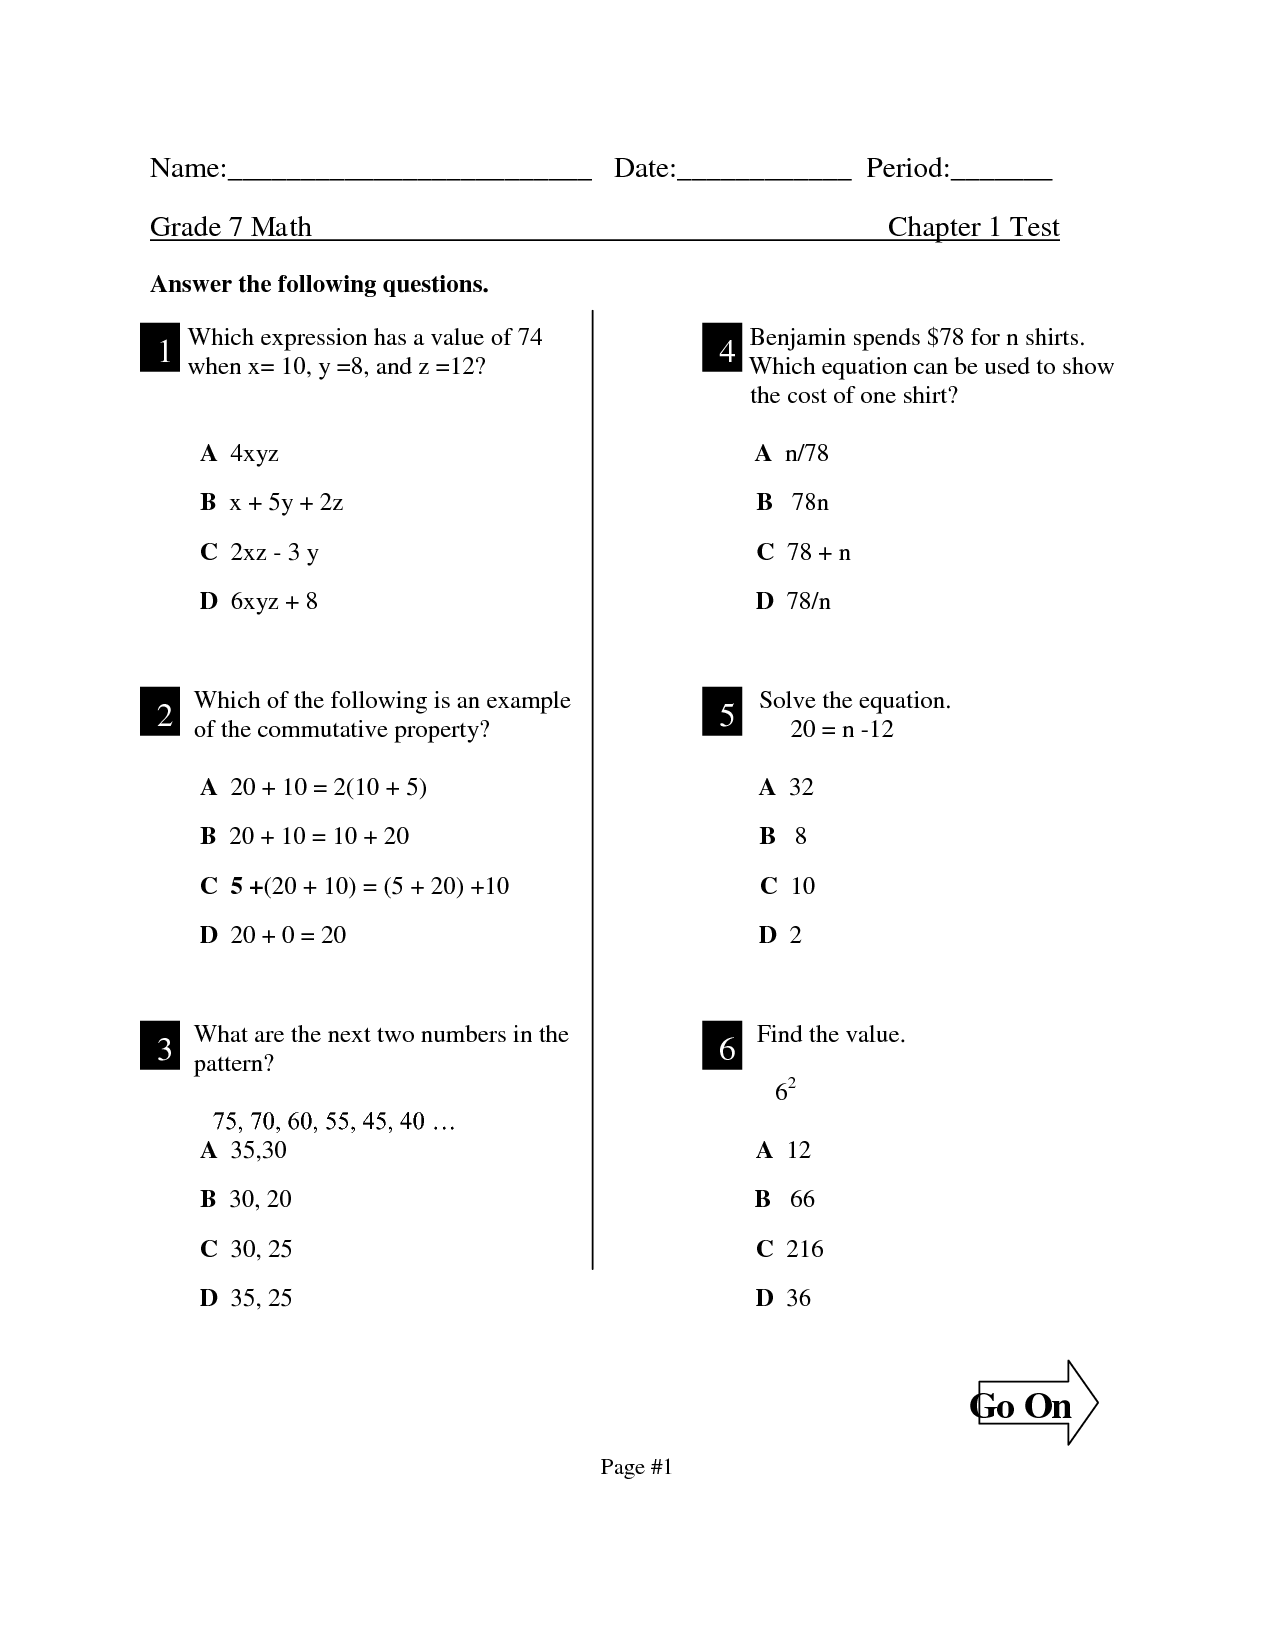 14 Best Images of 7th Grade Math Worksheets - 7th Grade ...